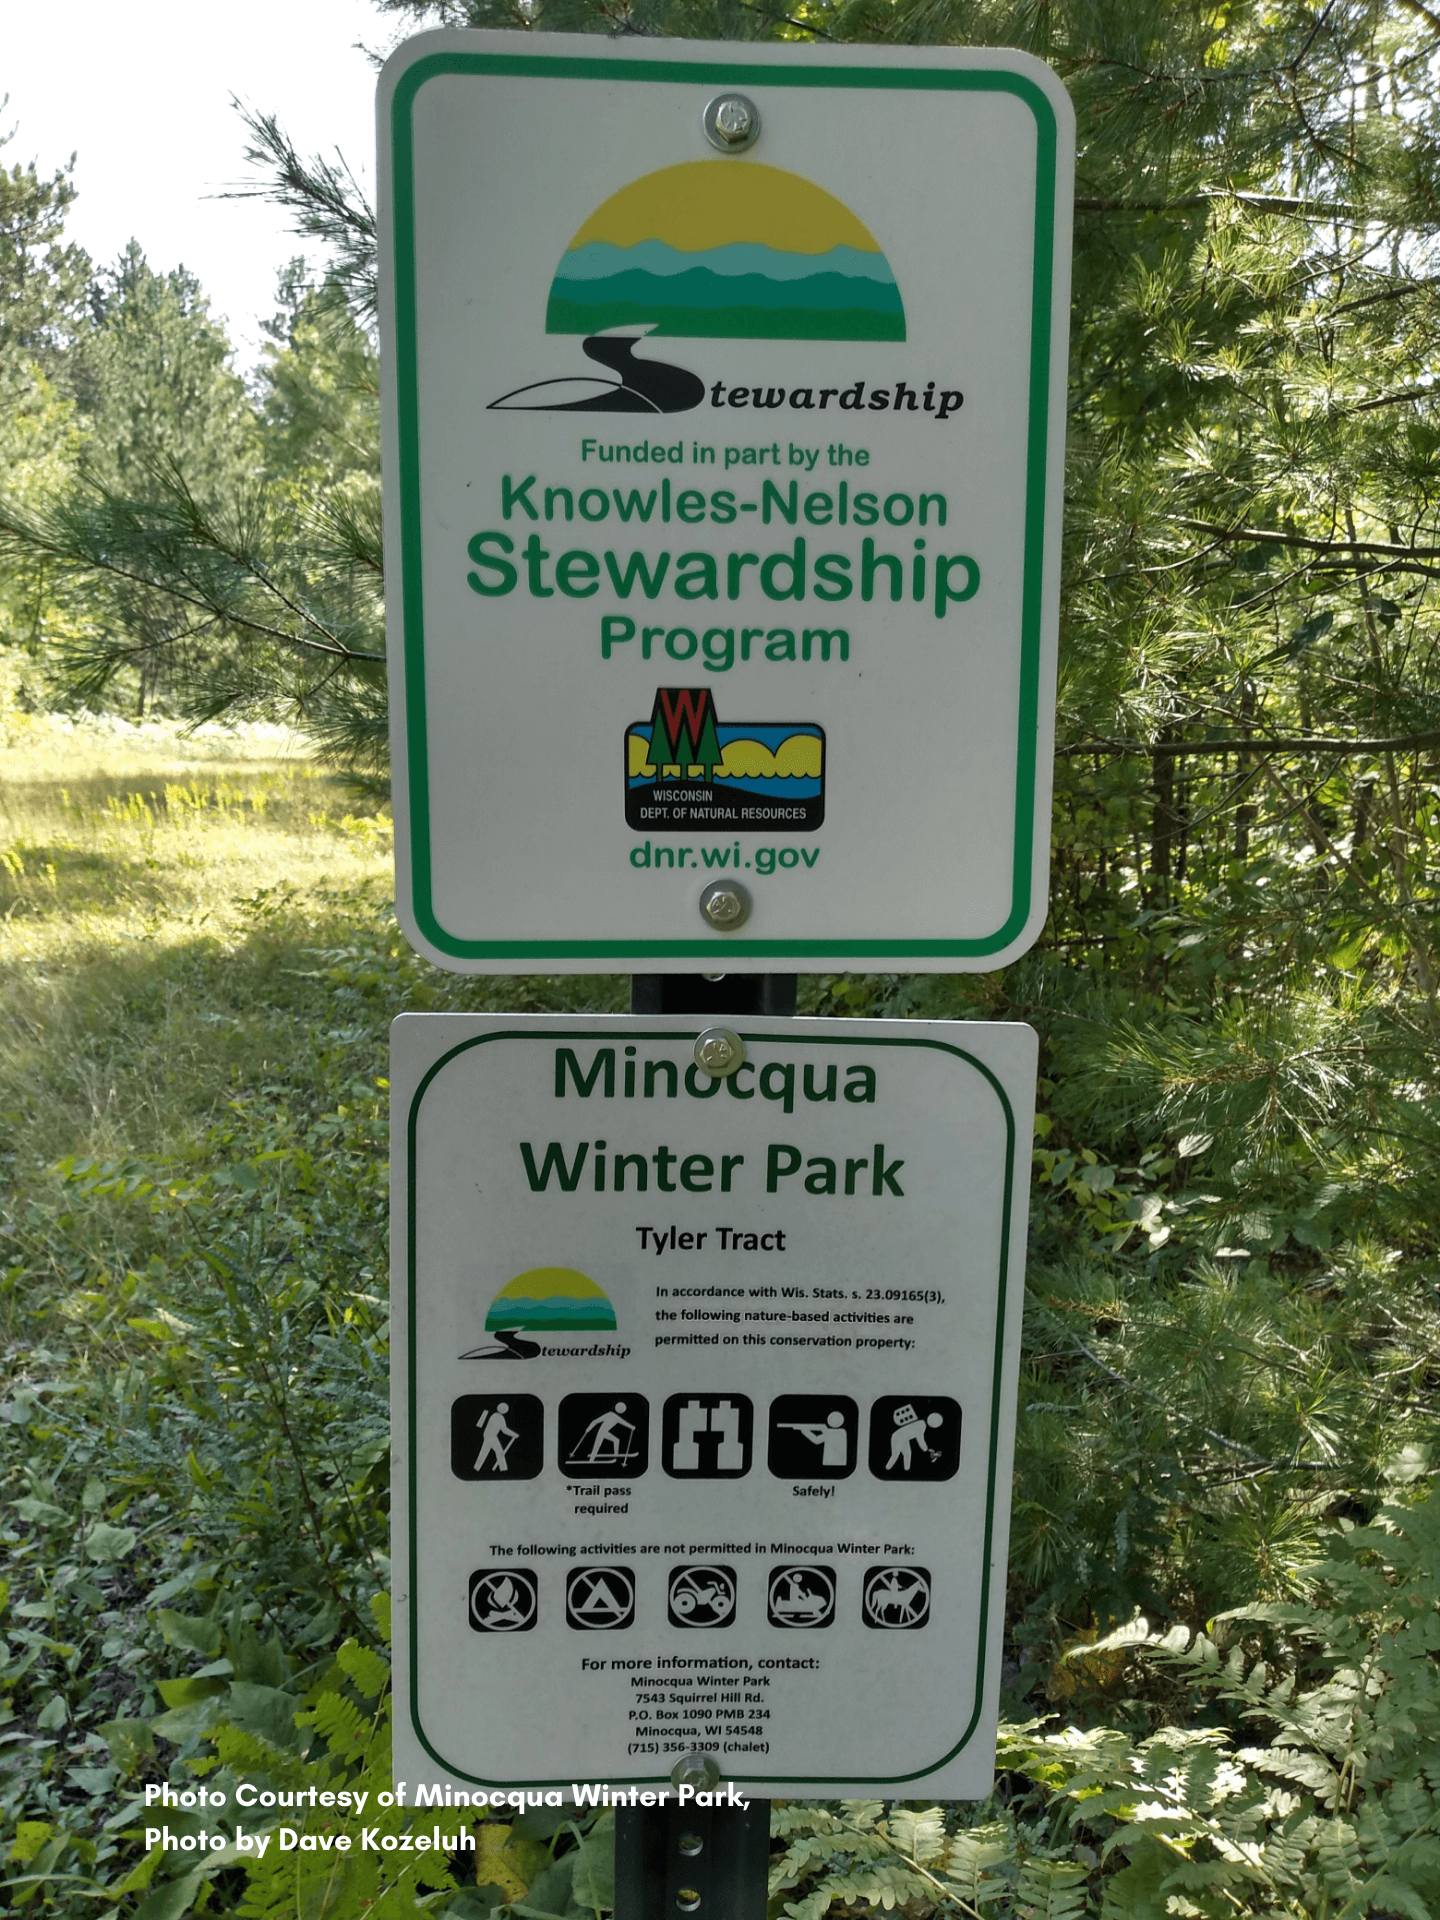 Sign displaying the Knowles-Nelson Stewardship Program logo, which shows that the property in question received Knowles-Nelson funding